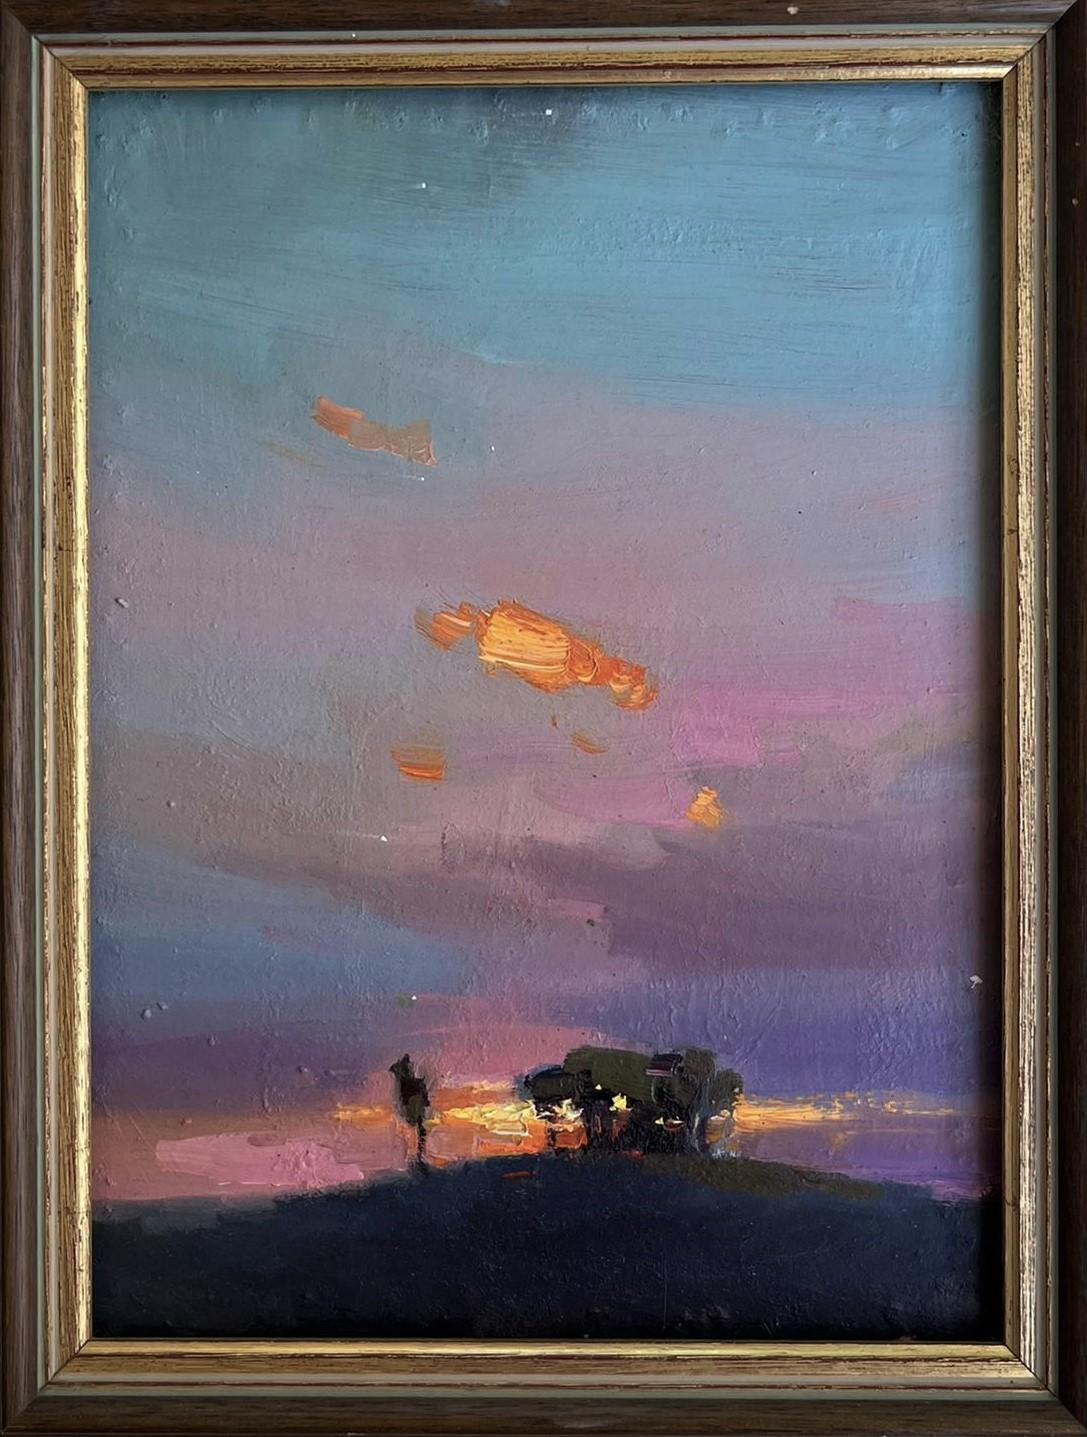 Max Skoblinsky  Landscape Painting - Grandeur of the Sunset: Landscape with the Perfect Blend of Contrast and Harmony